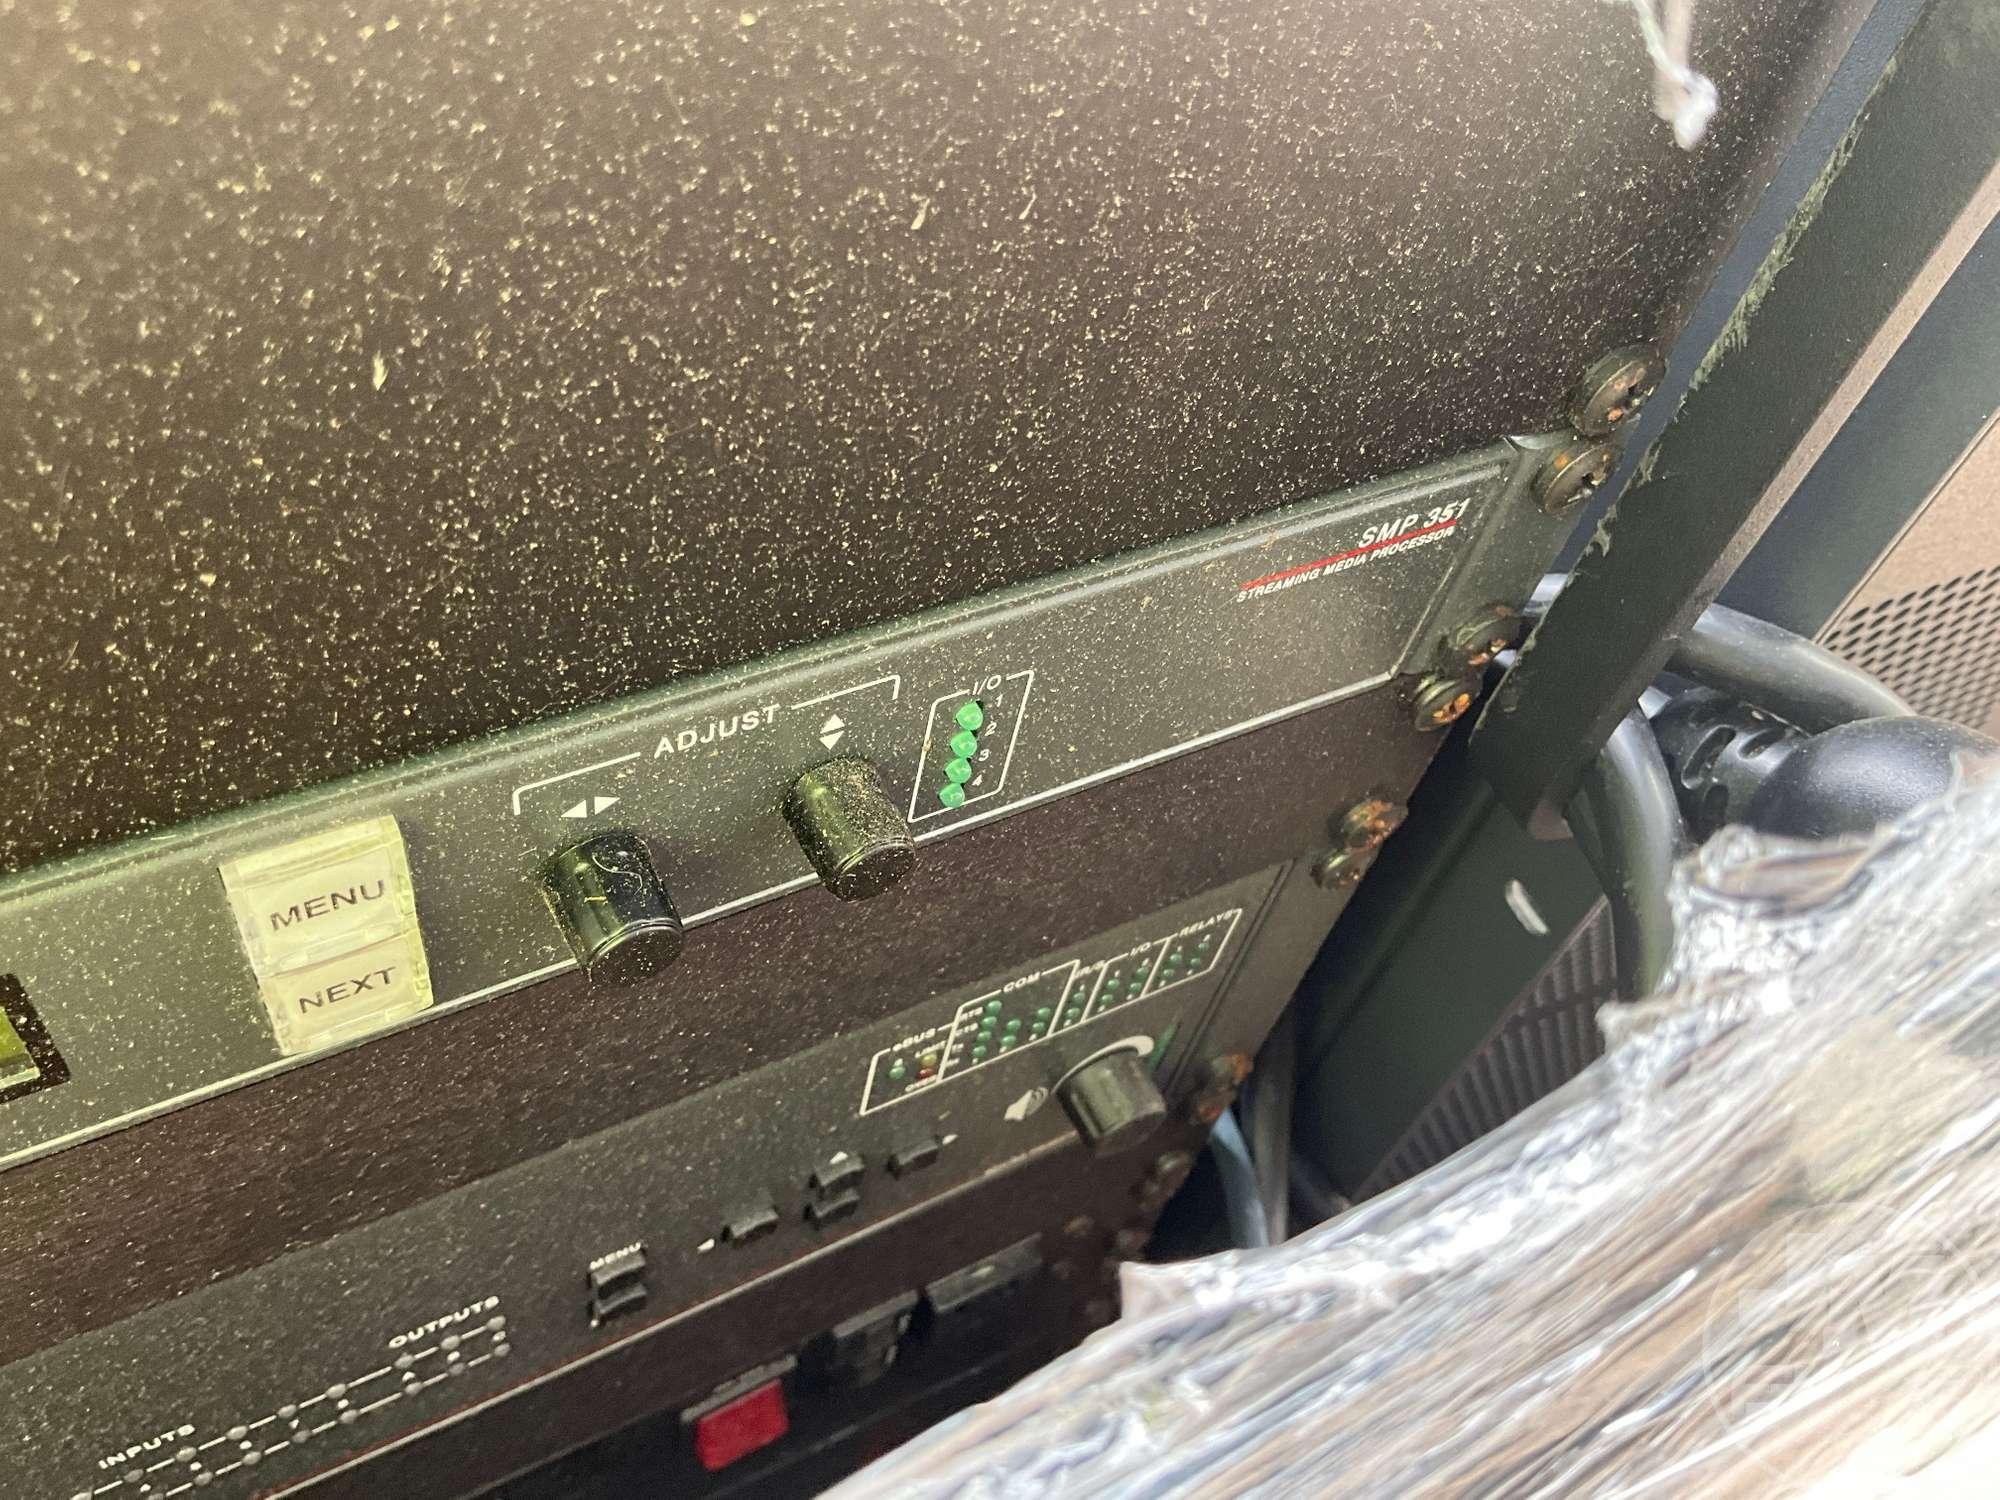 1 CRATE OF ARIOUS ELECTRONIC EQUIPMENT, EXTRON DIGTAL MATRIX SWITCHER,